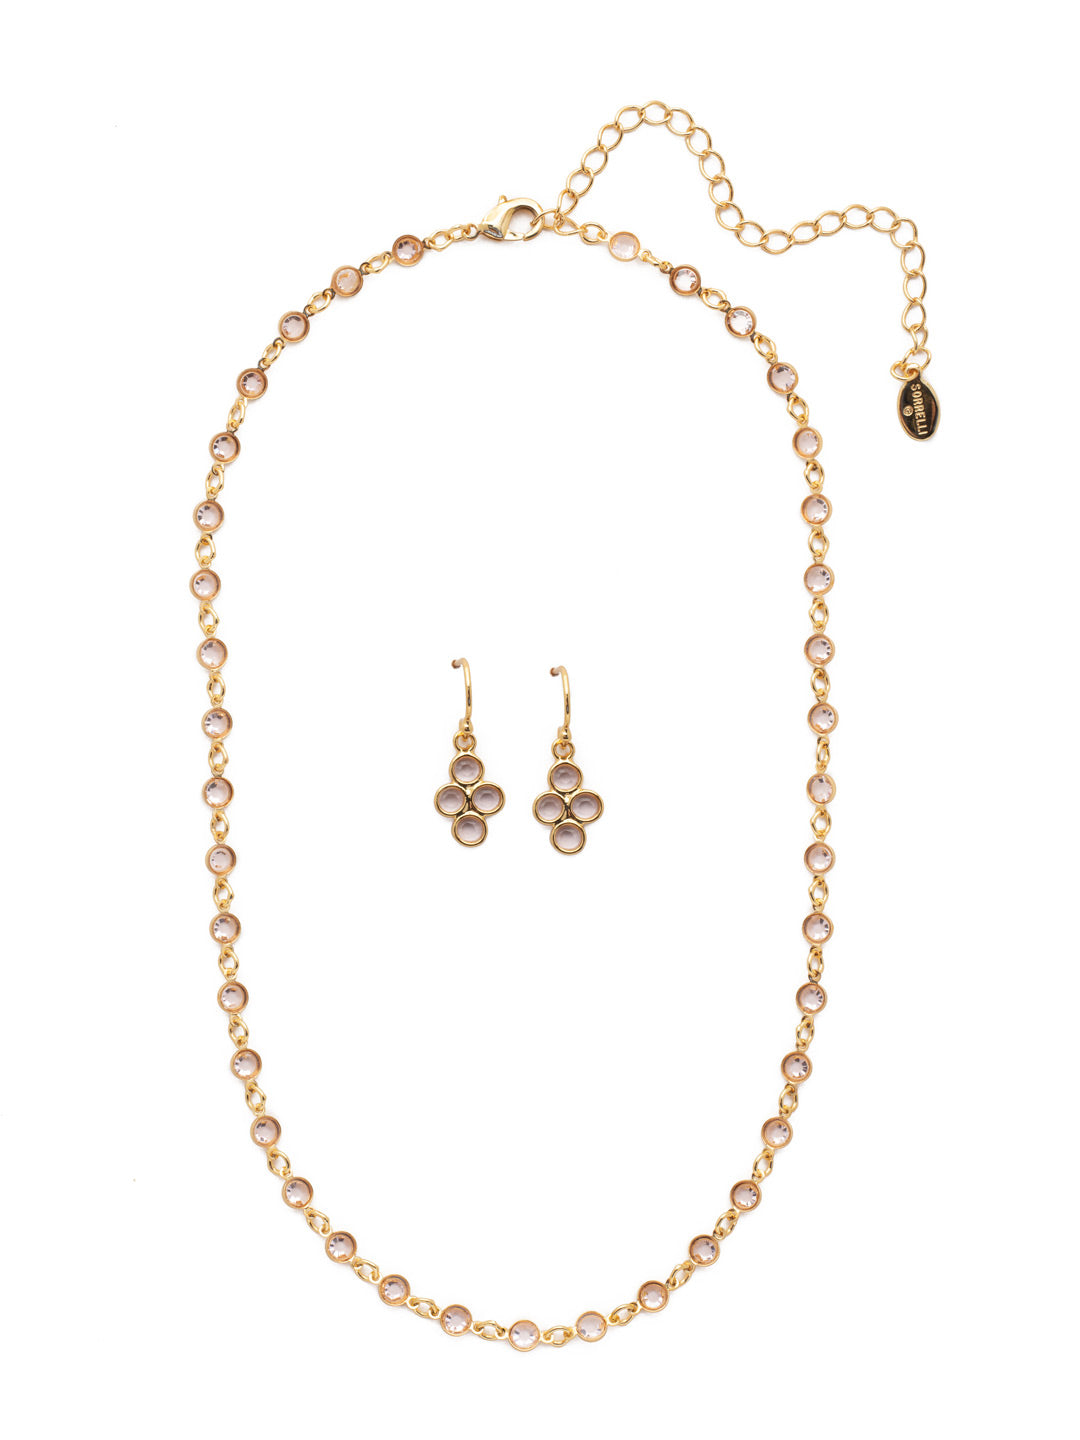 Perfect Pair Necklace/Earring Gift Set - GEP9392BGSIL - <p>The Perfect Pair features our beautiful Aubrielle Dangle Earrings and our Jasmine Tennis Necklace. These two pieces were made to be styled together for the perfect look. From Sorrelli's Silk collection in our Bright Gold-tone finish.</p>